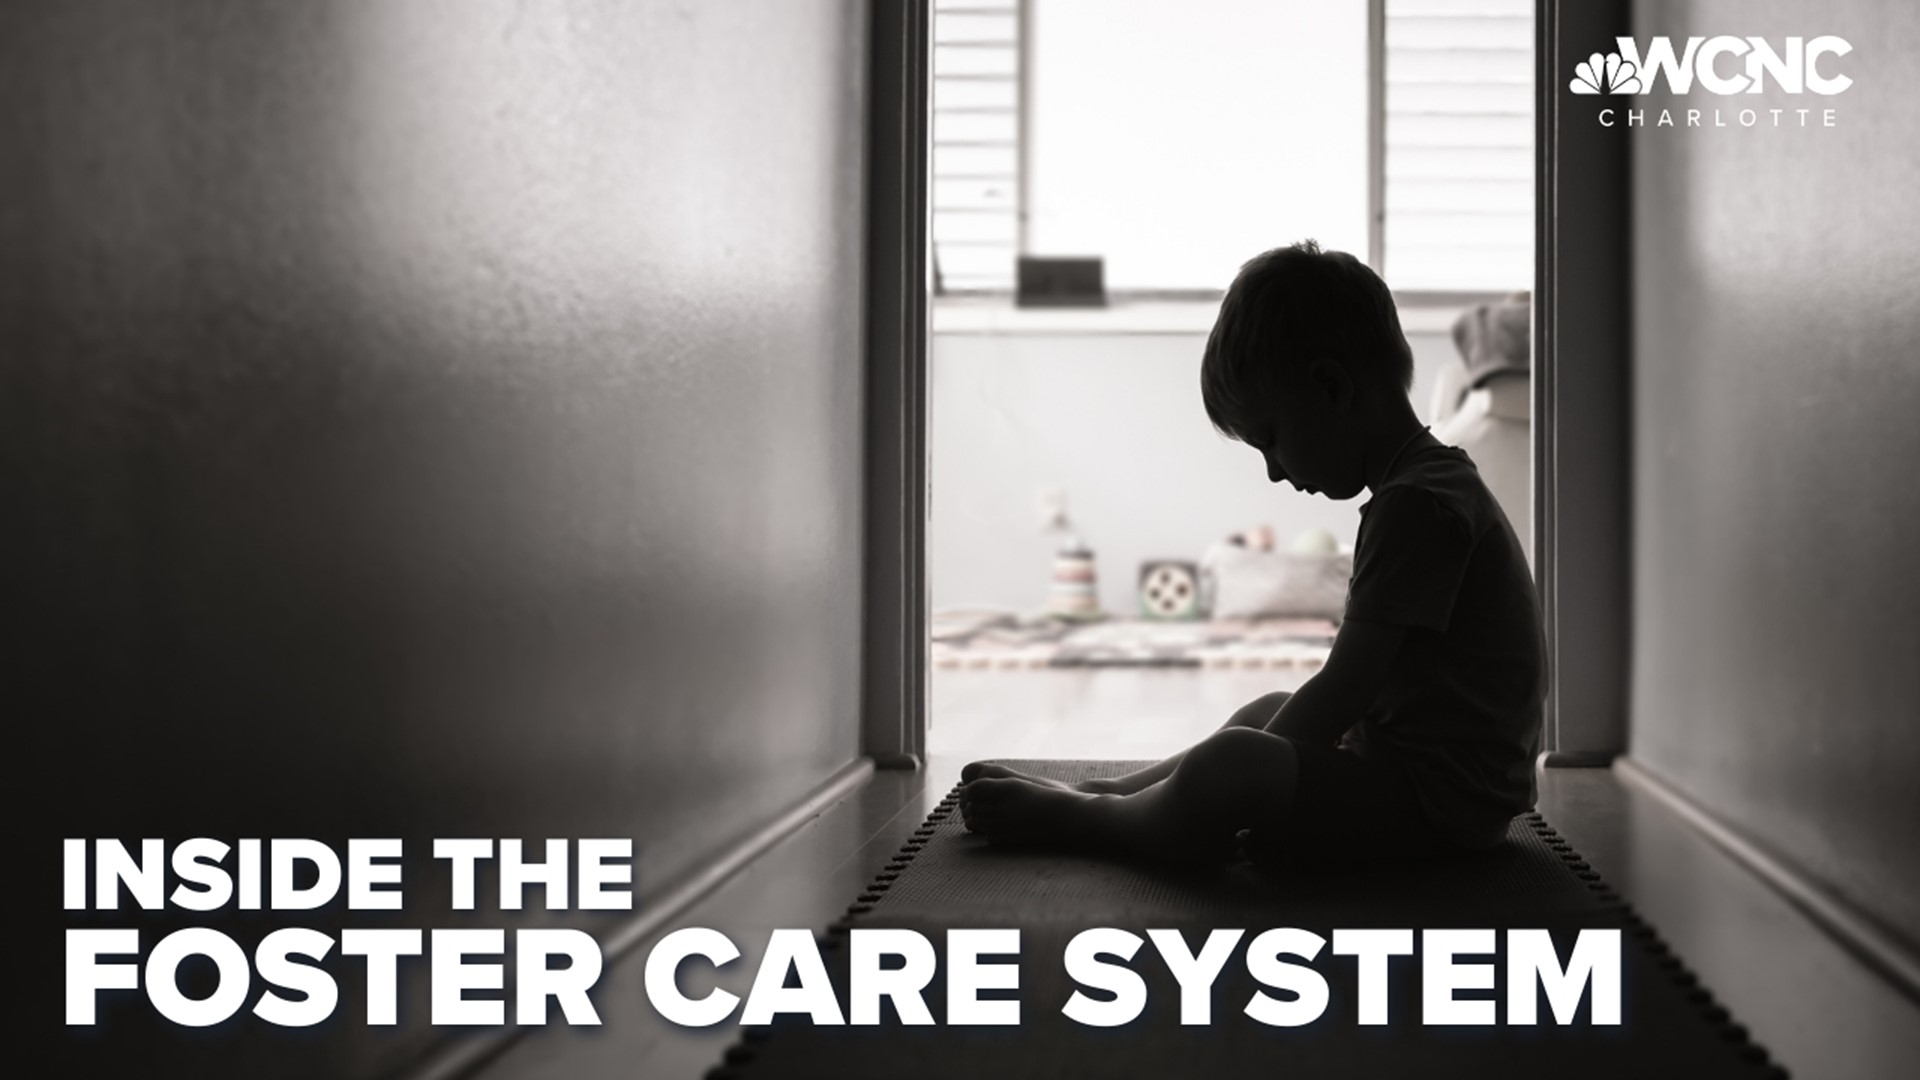 A WCNC Charlotte investigation uncovers a shocking secret about kids in the foster care system in Charlotte.